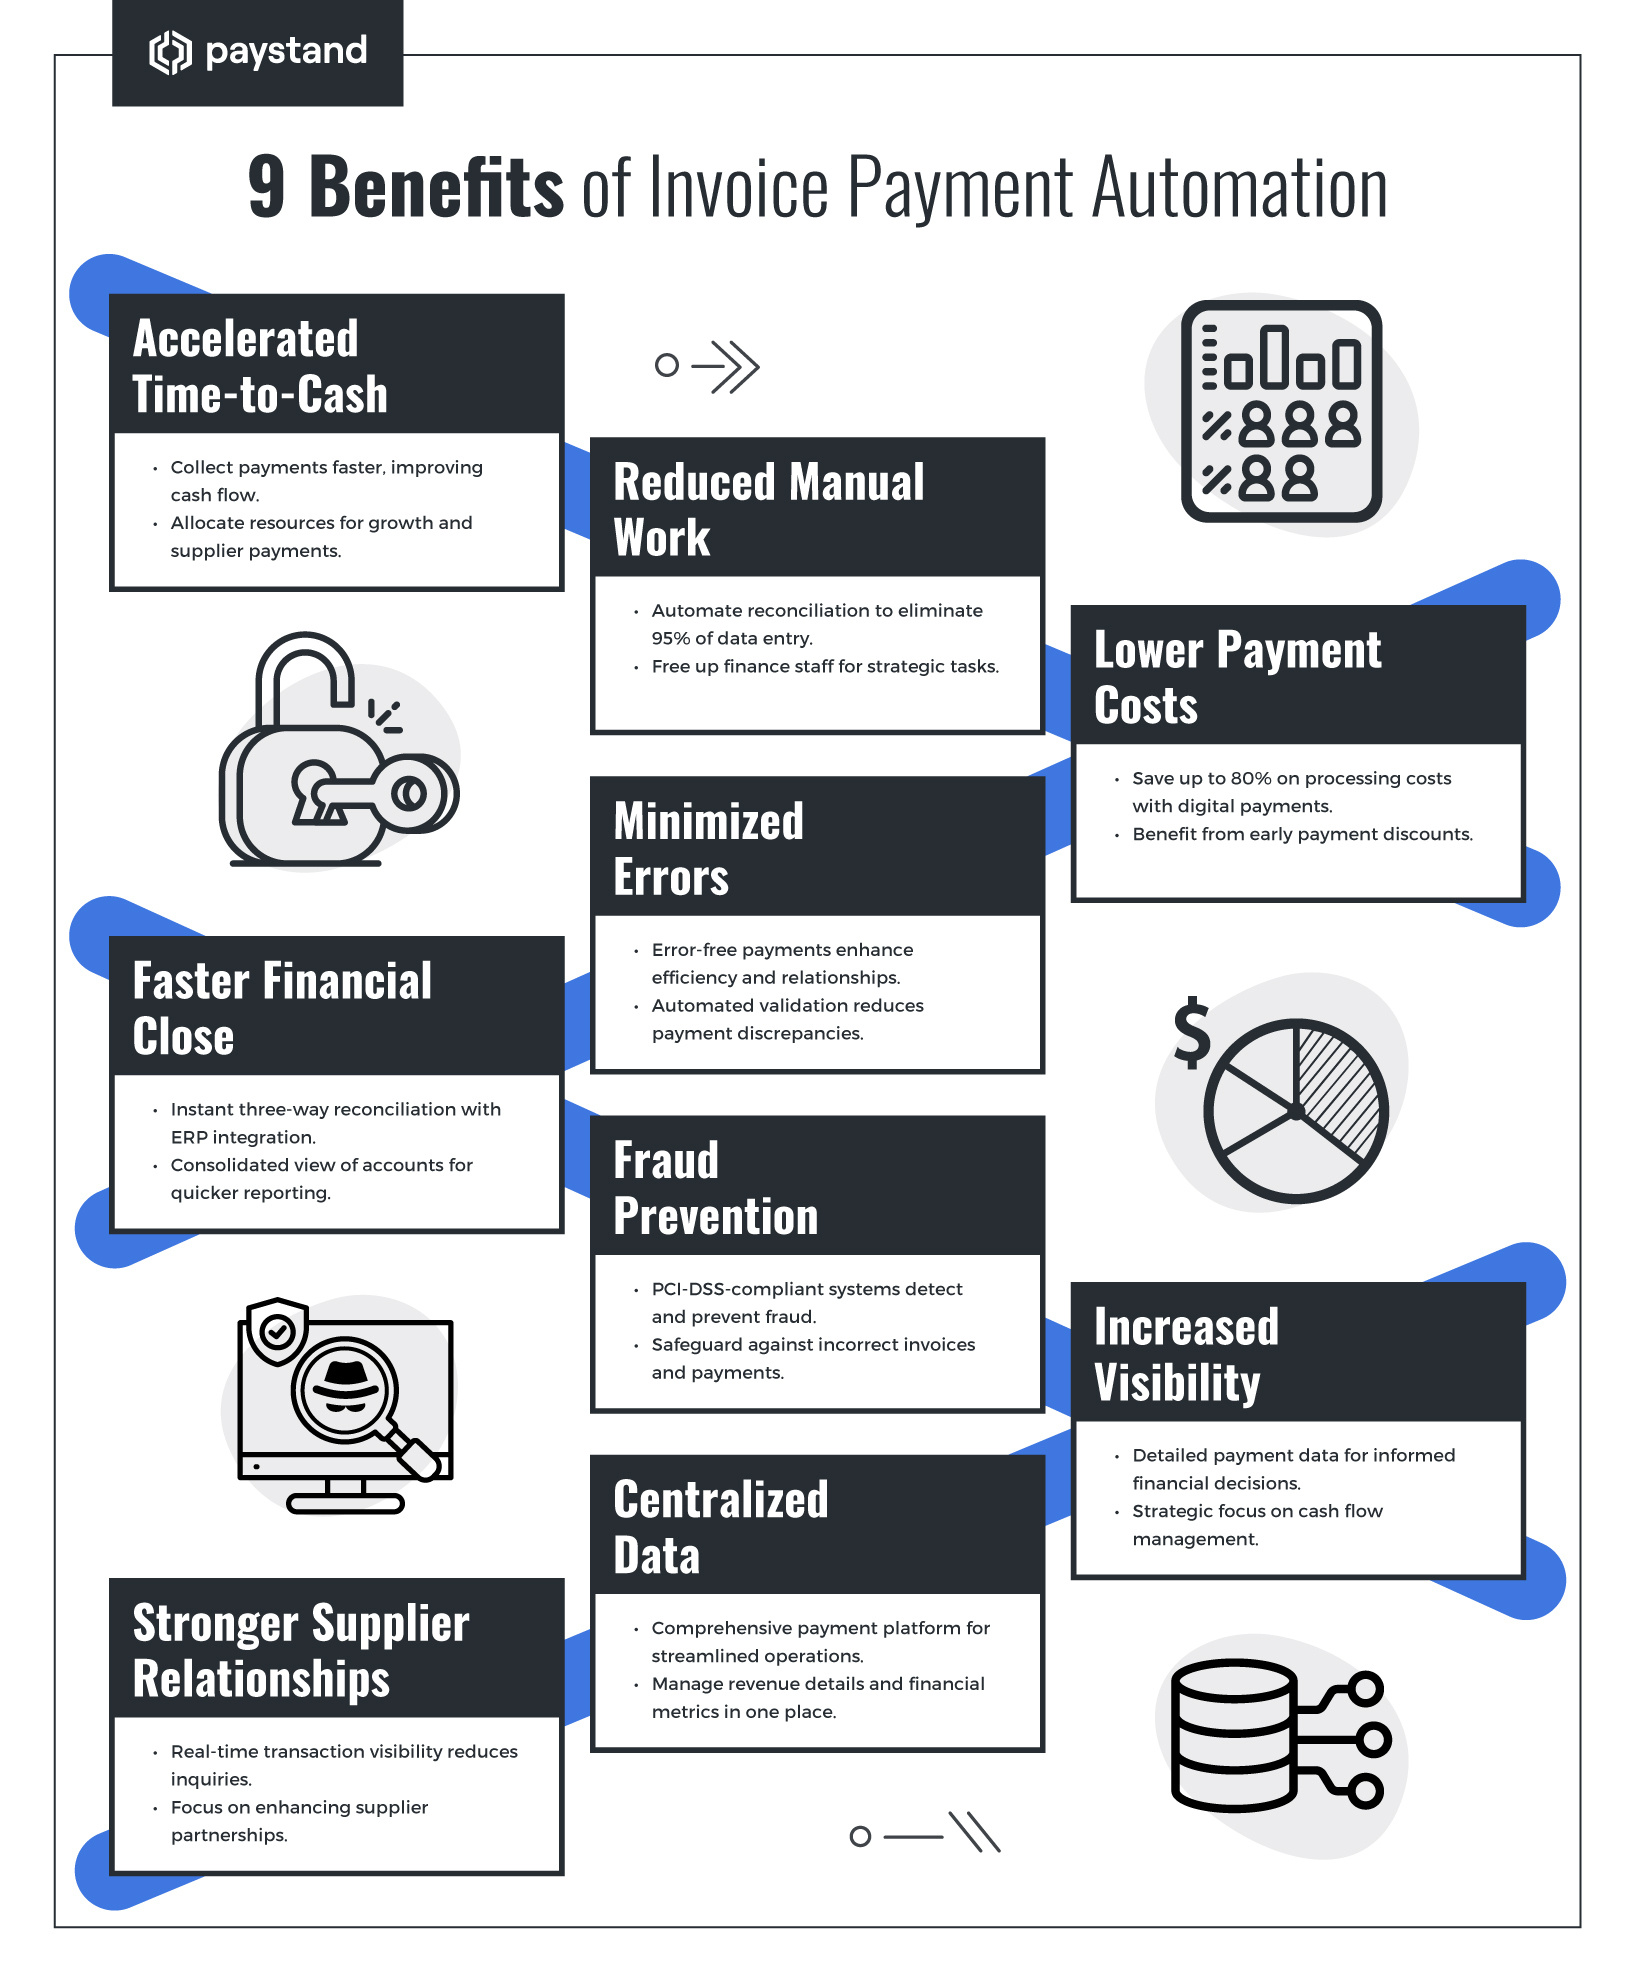 9 Benefits of Invoice Payment Automation